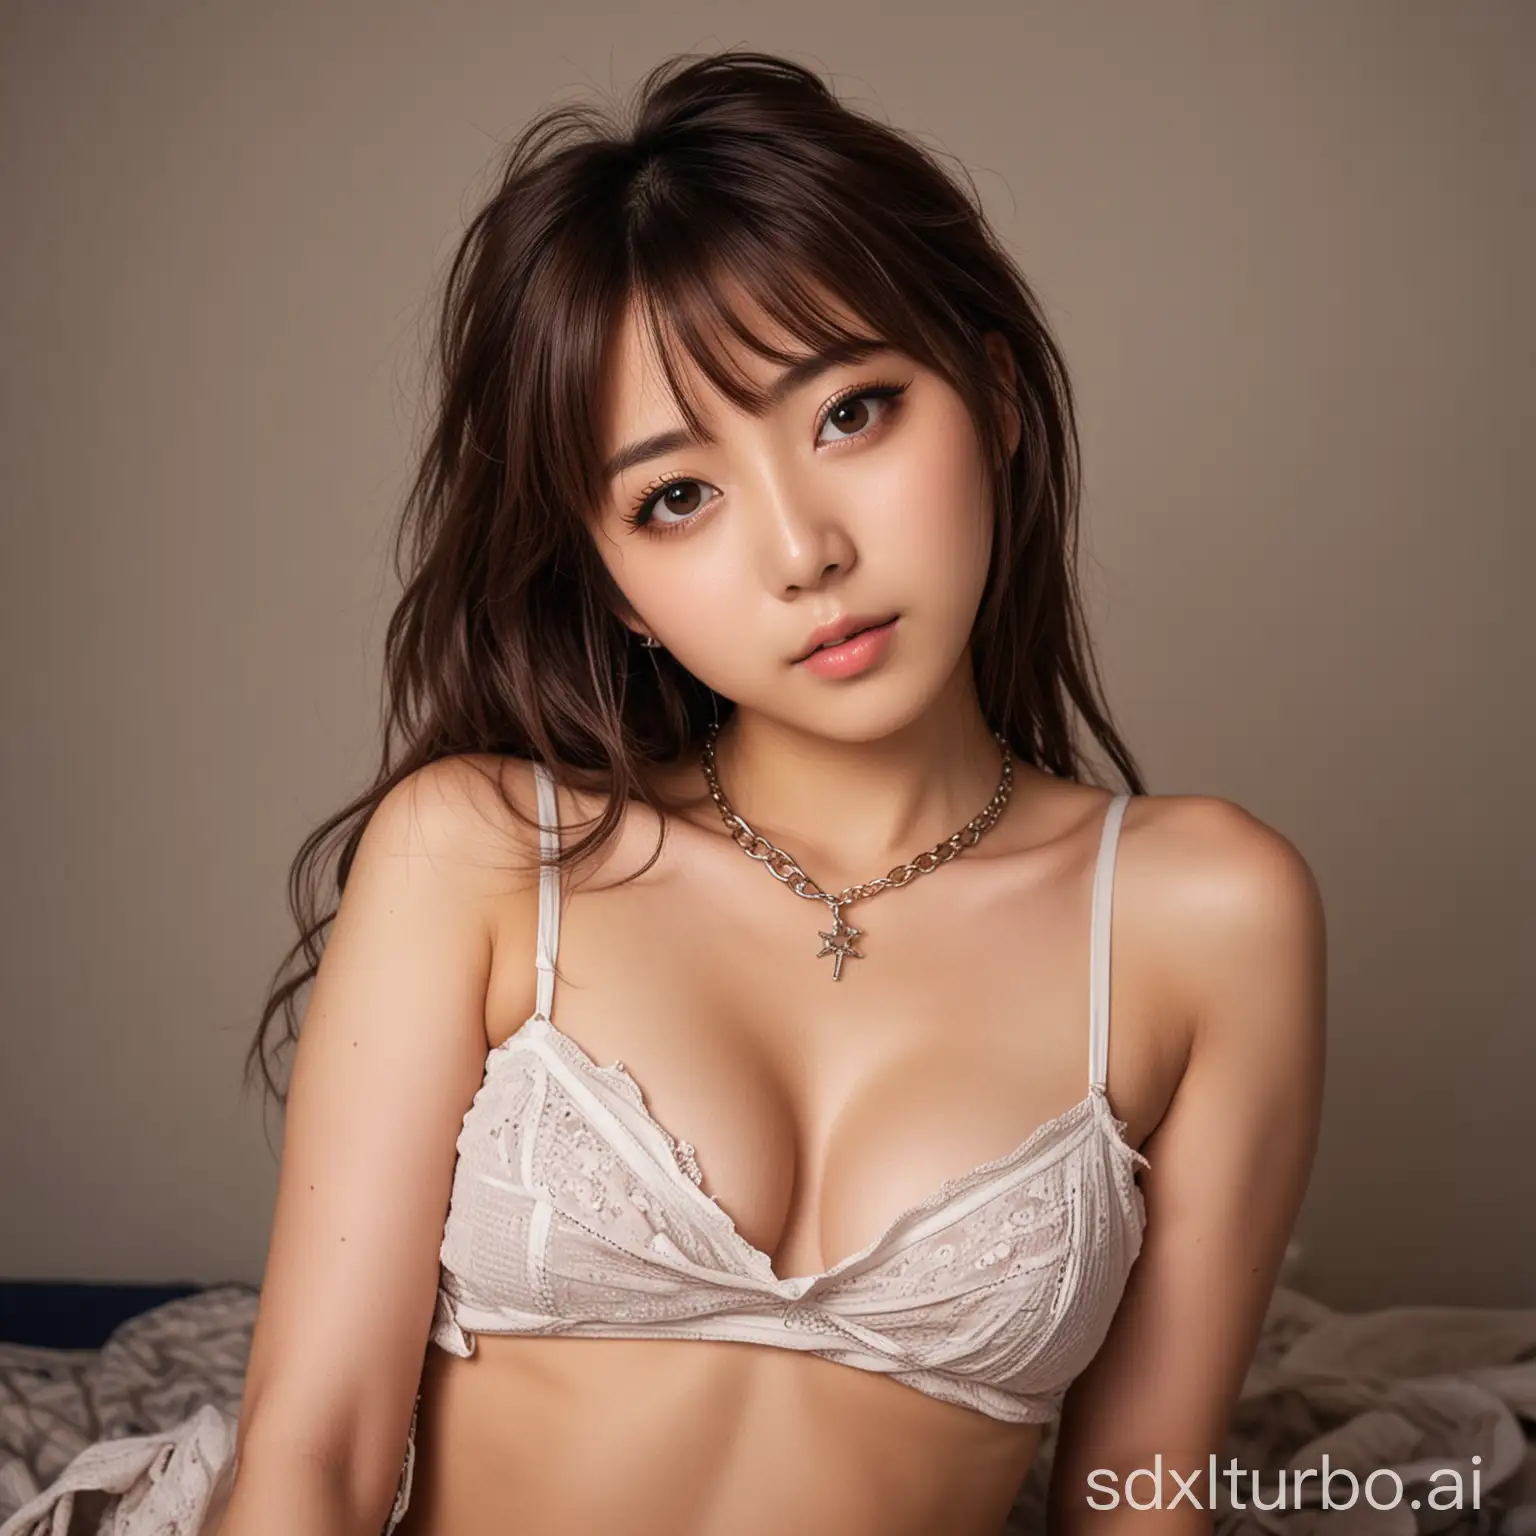 Seductive-Japanese-Idol-in-Dim-Light-with-Torn-Clothes-and-Chains